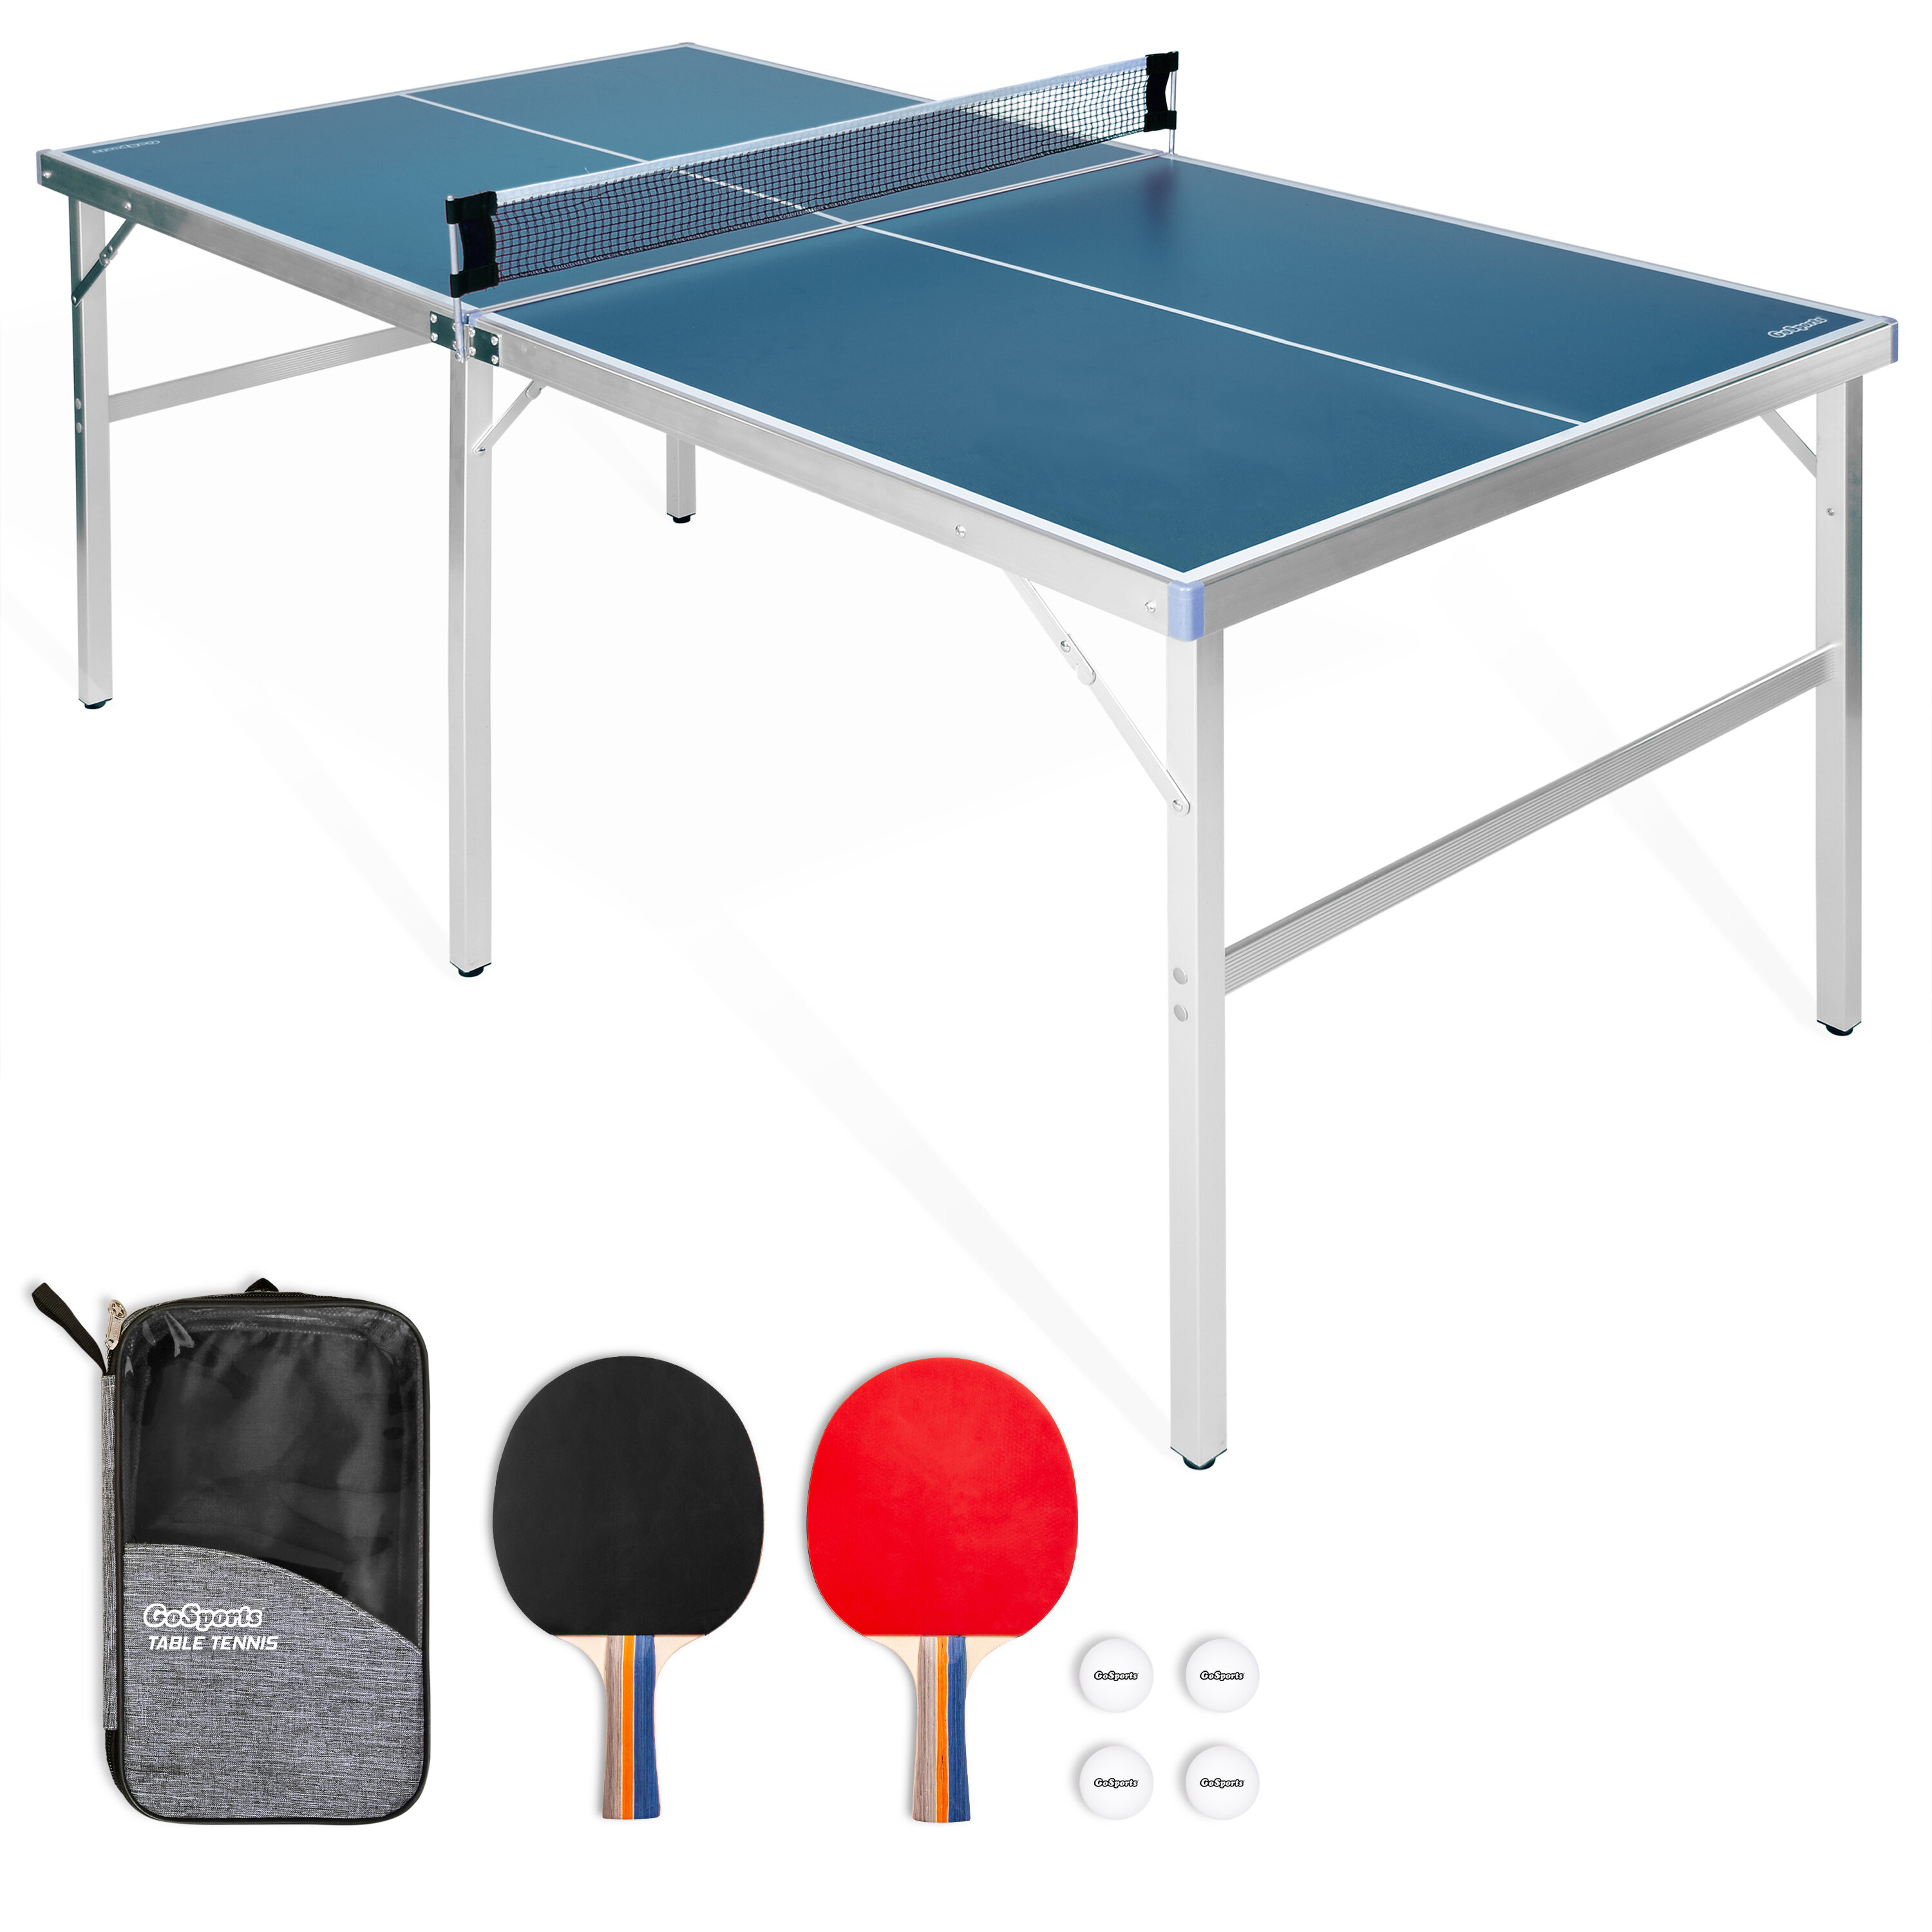 2 Ping Pong Paddles for All Ages. Attach to Any Table Surface 6 pcs Balls All-in-ONE Portable Table Tennis Set with Retractable Net 